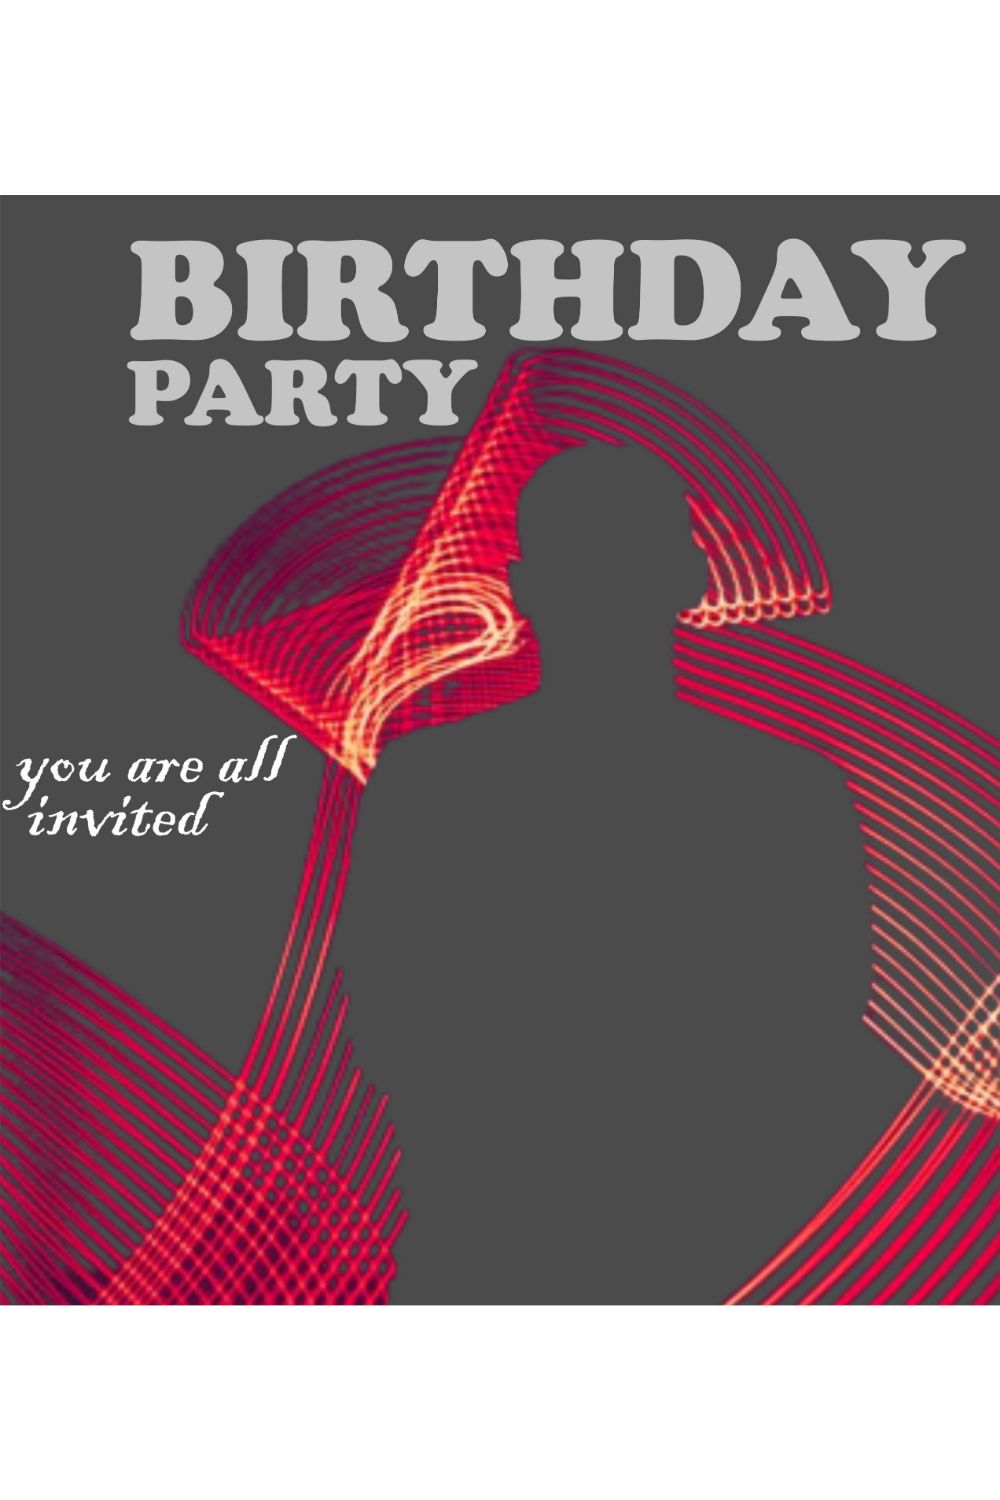 Birthday party flyer template pinterest preview image.